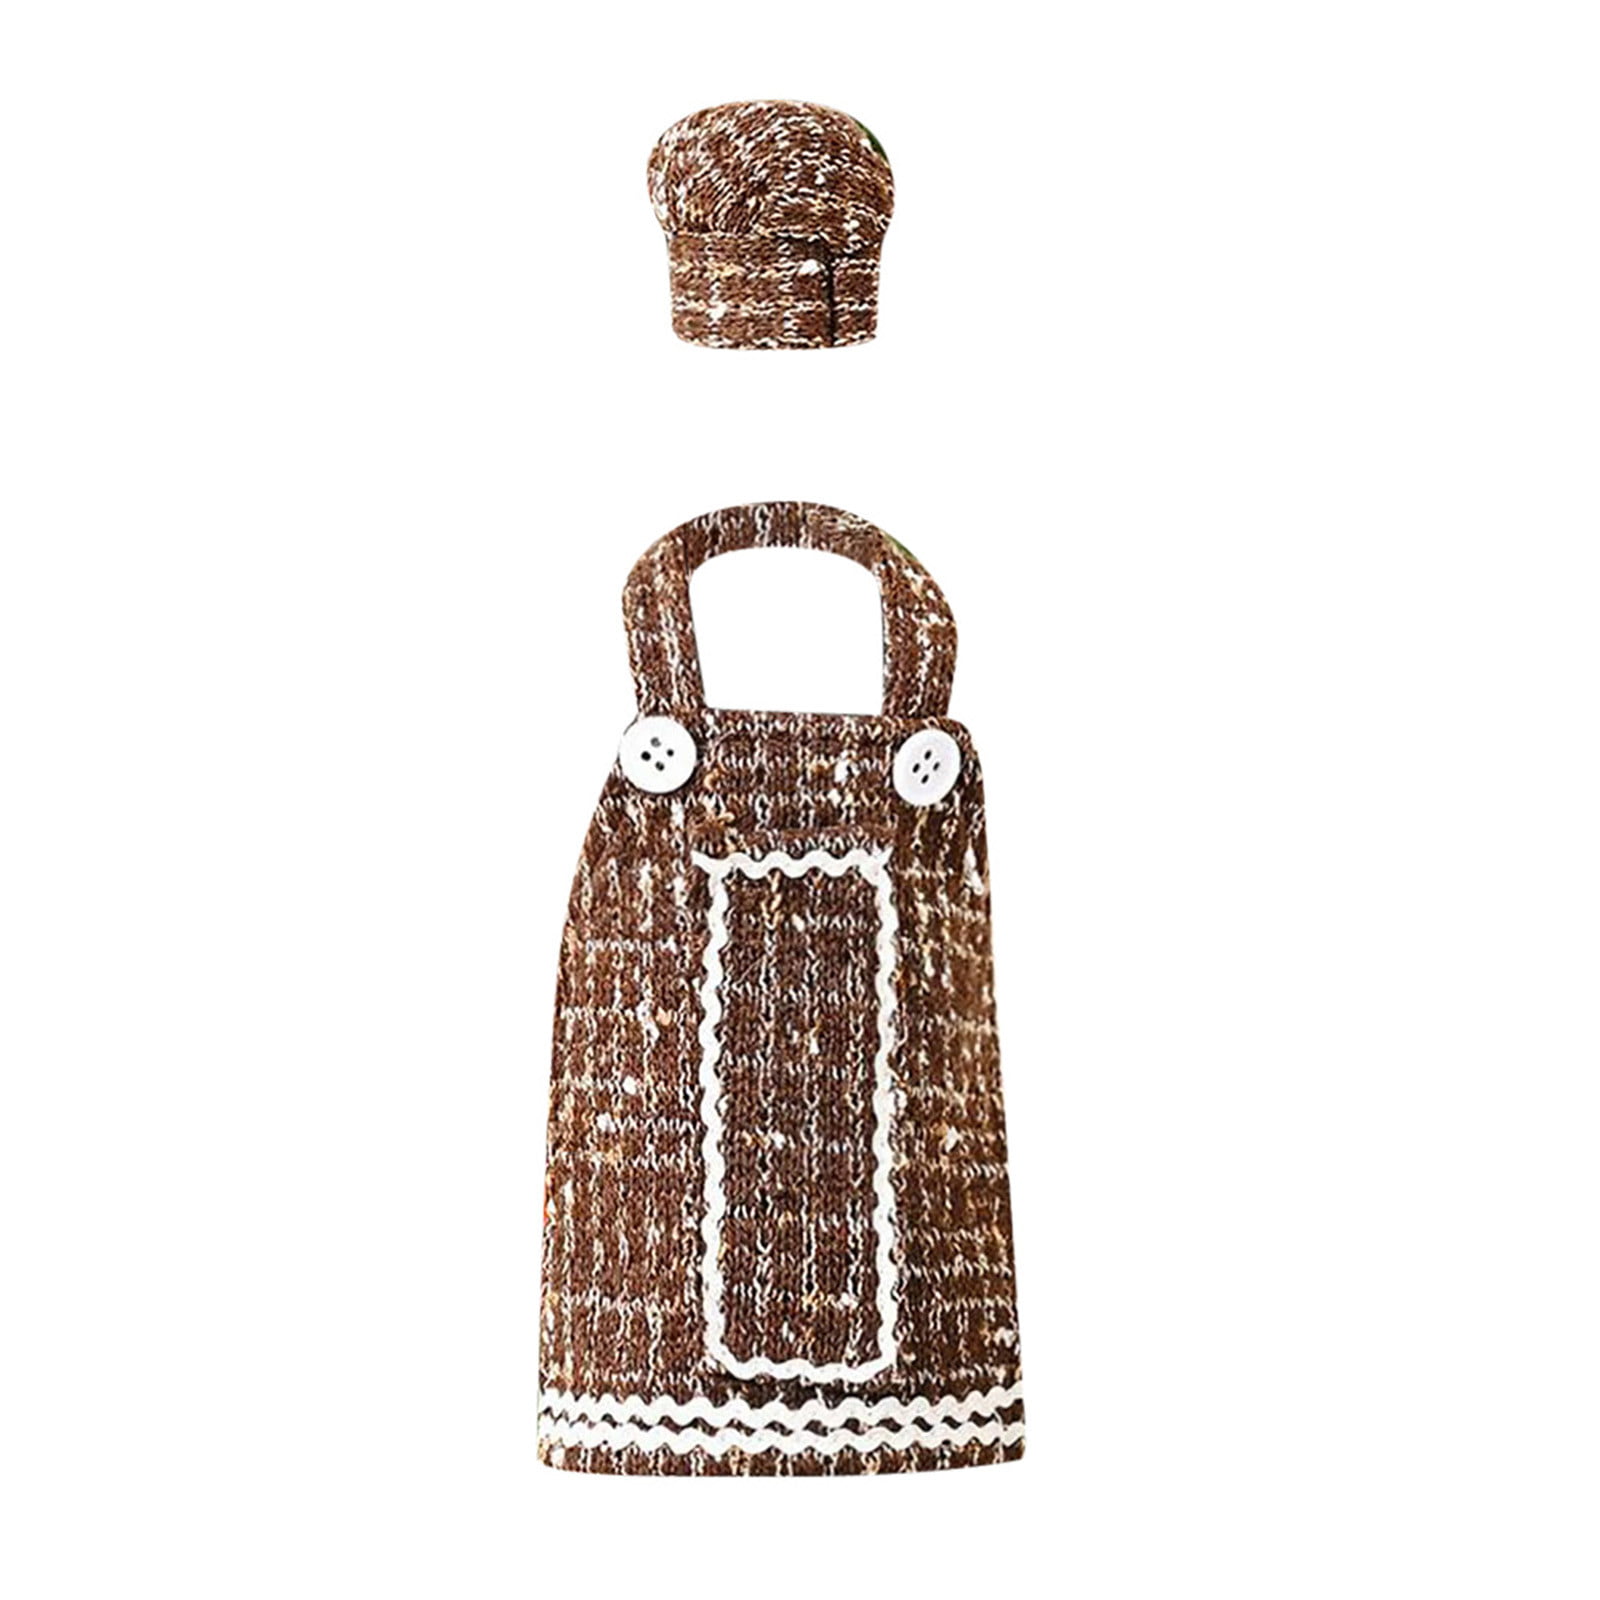 Details about   Christmas Santa Wine Bottle Cover Bag Dress Xmas Holiday Home Decorations Gifts 